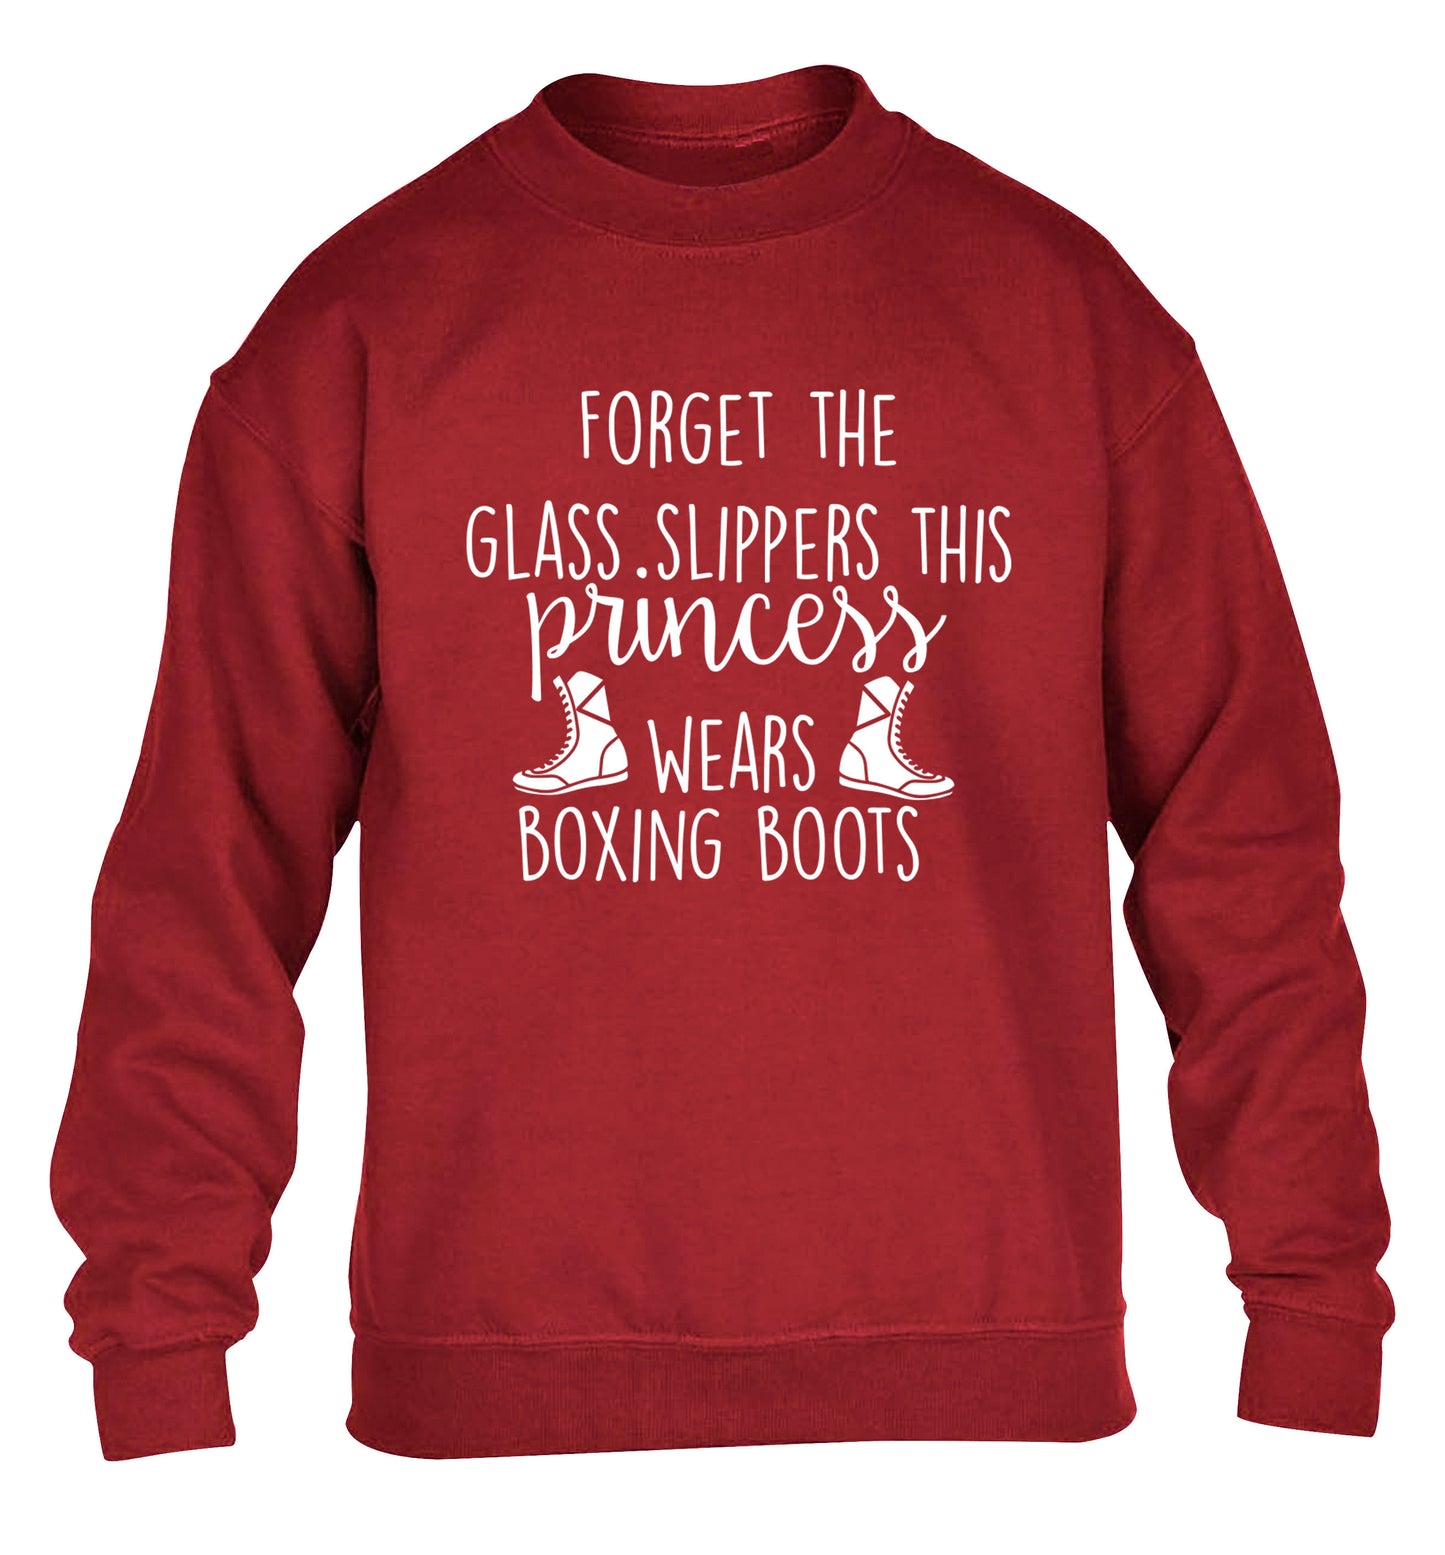 Forget the glass slippers this princess wears boxing boots children's grey sweater 12-14 Years